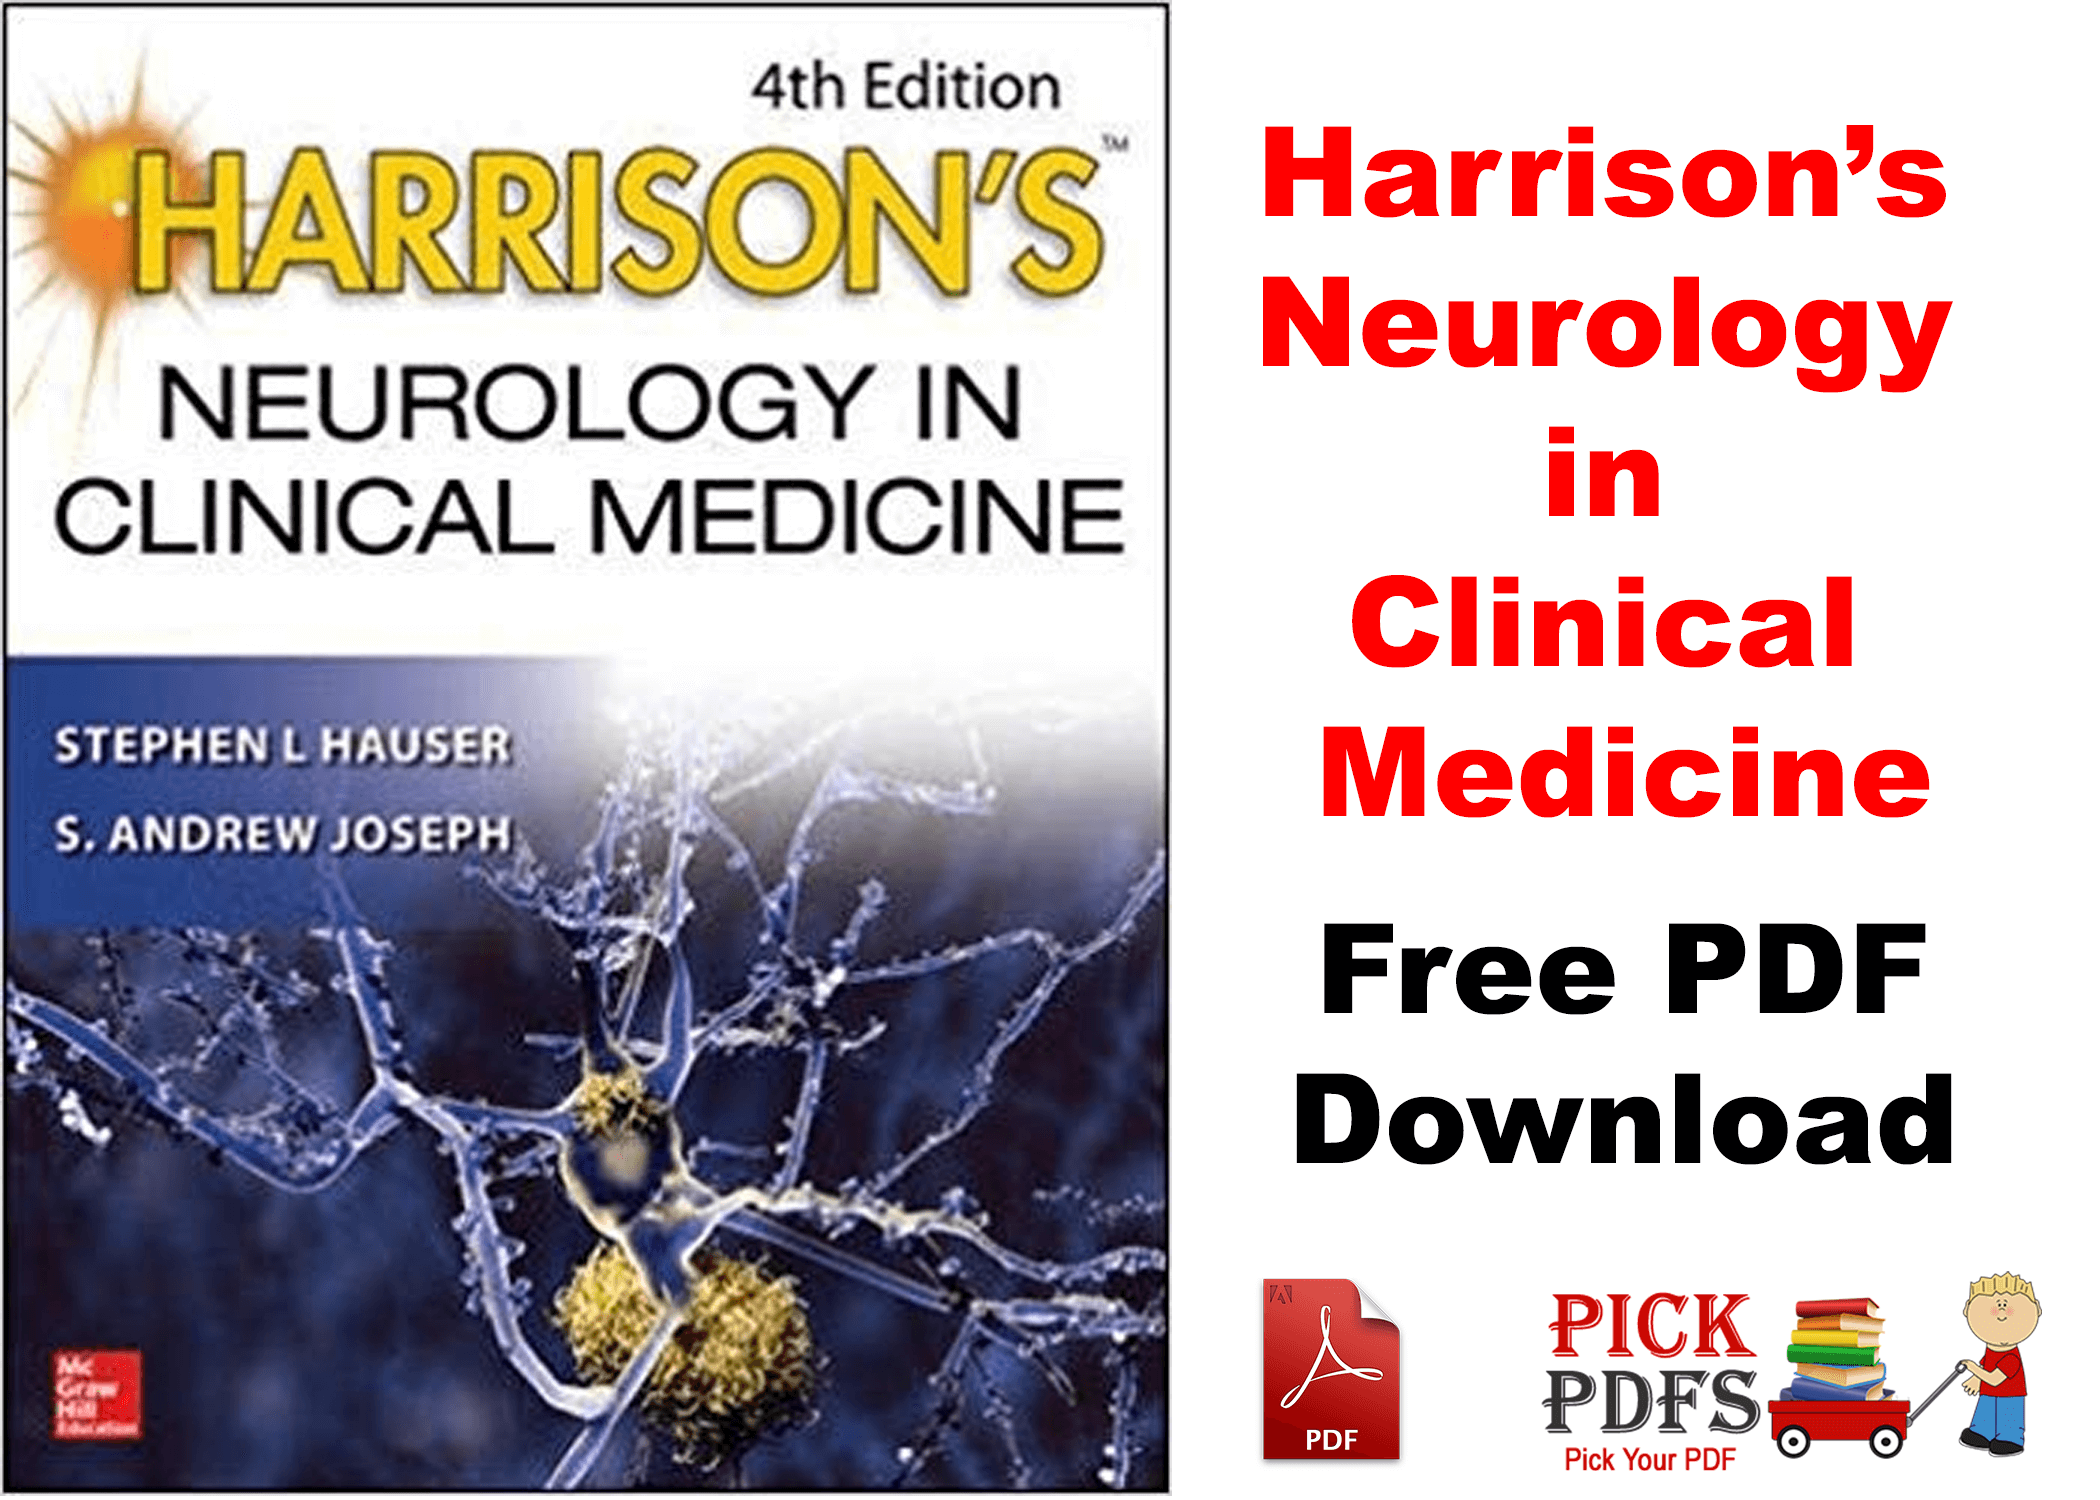 https://pickpdfs.com/download-the-human-brain-book-pdf-revised-edition-free2021/